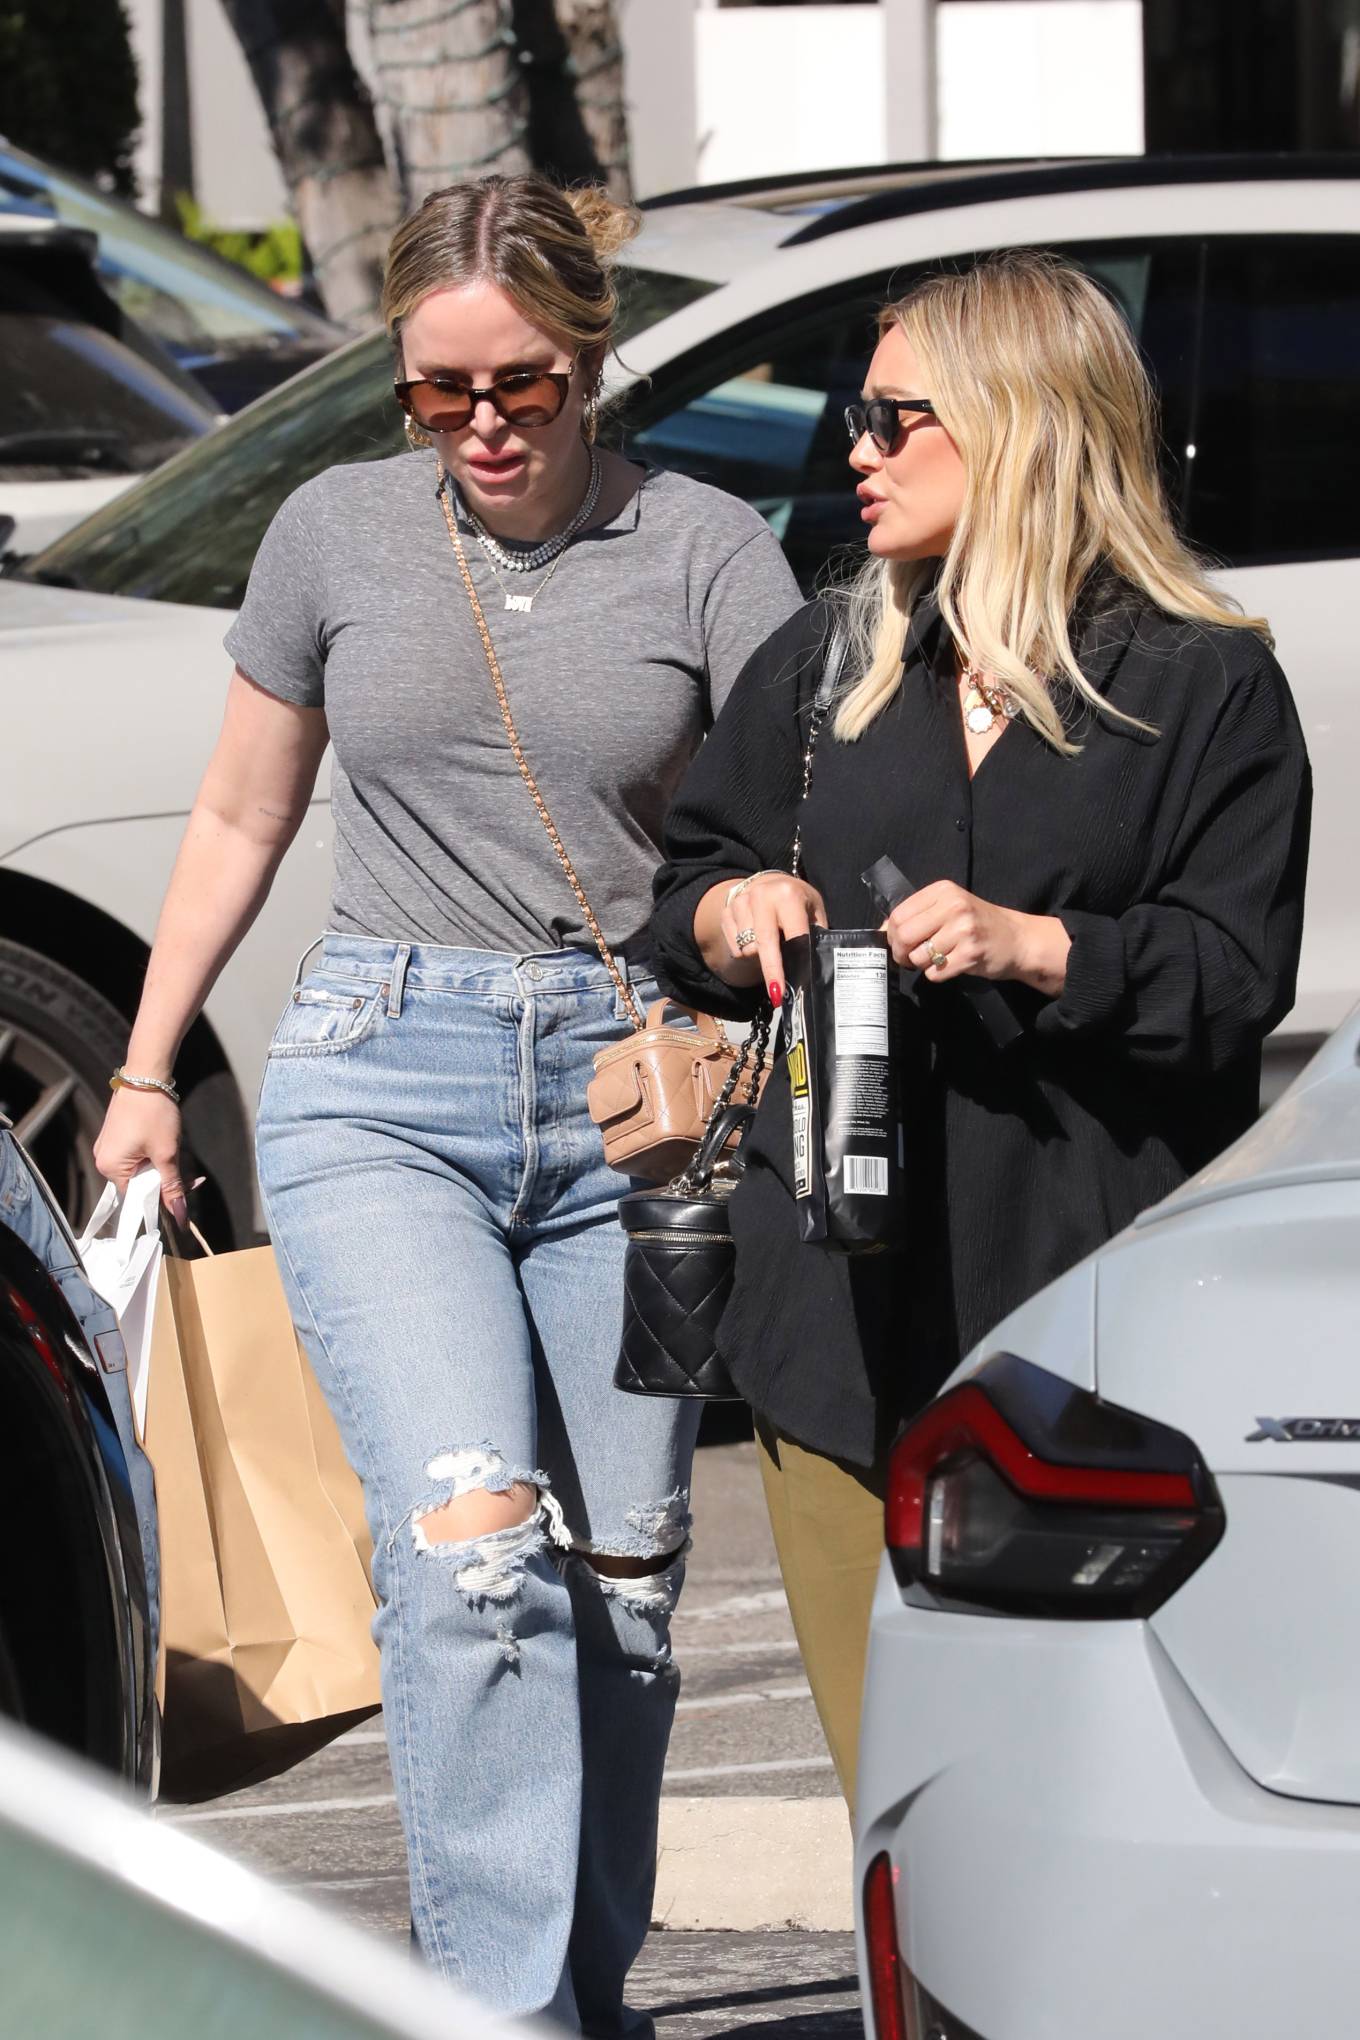 Hilary Duff - Shopping in Los Angeles